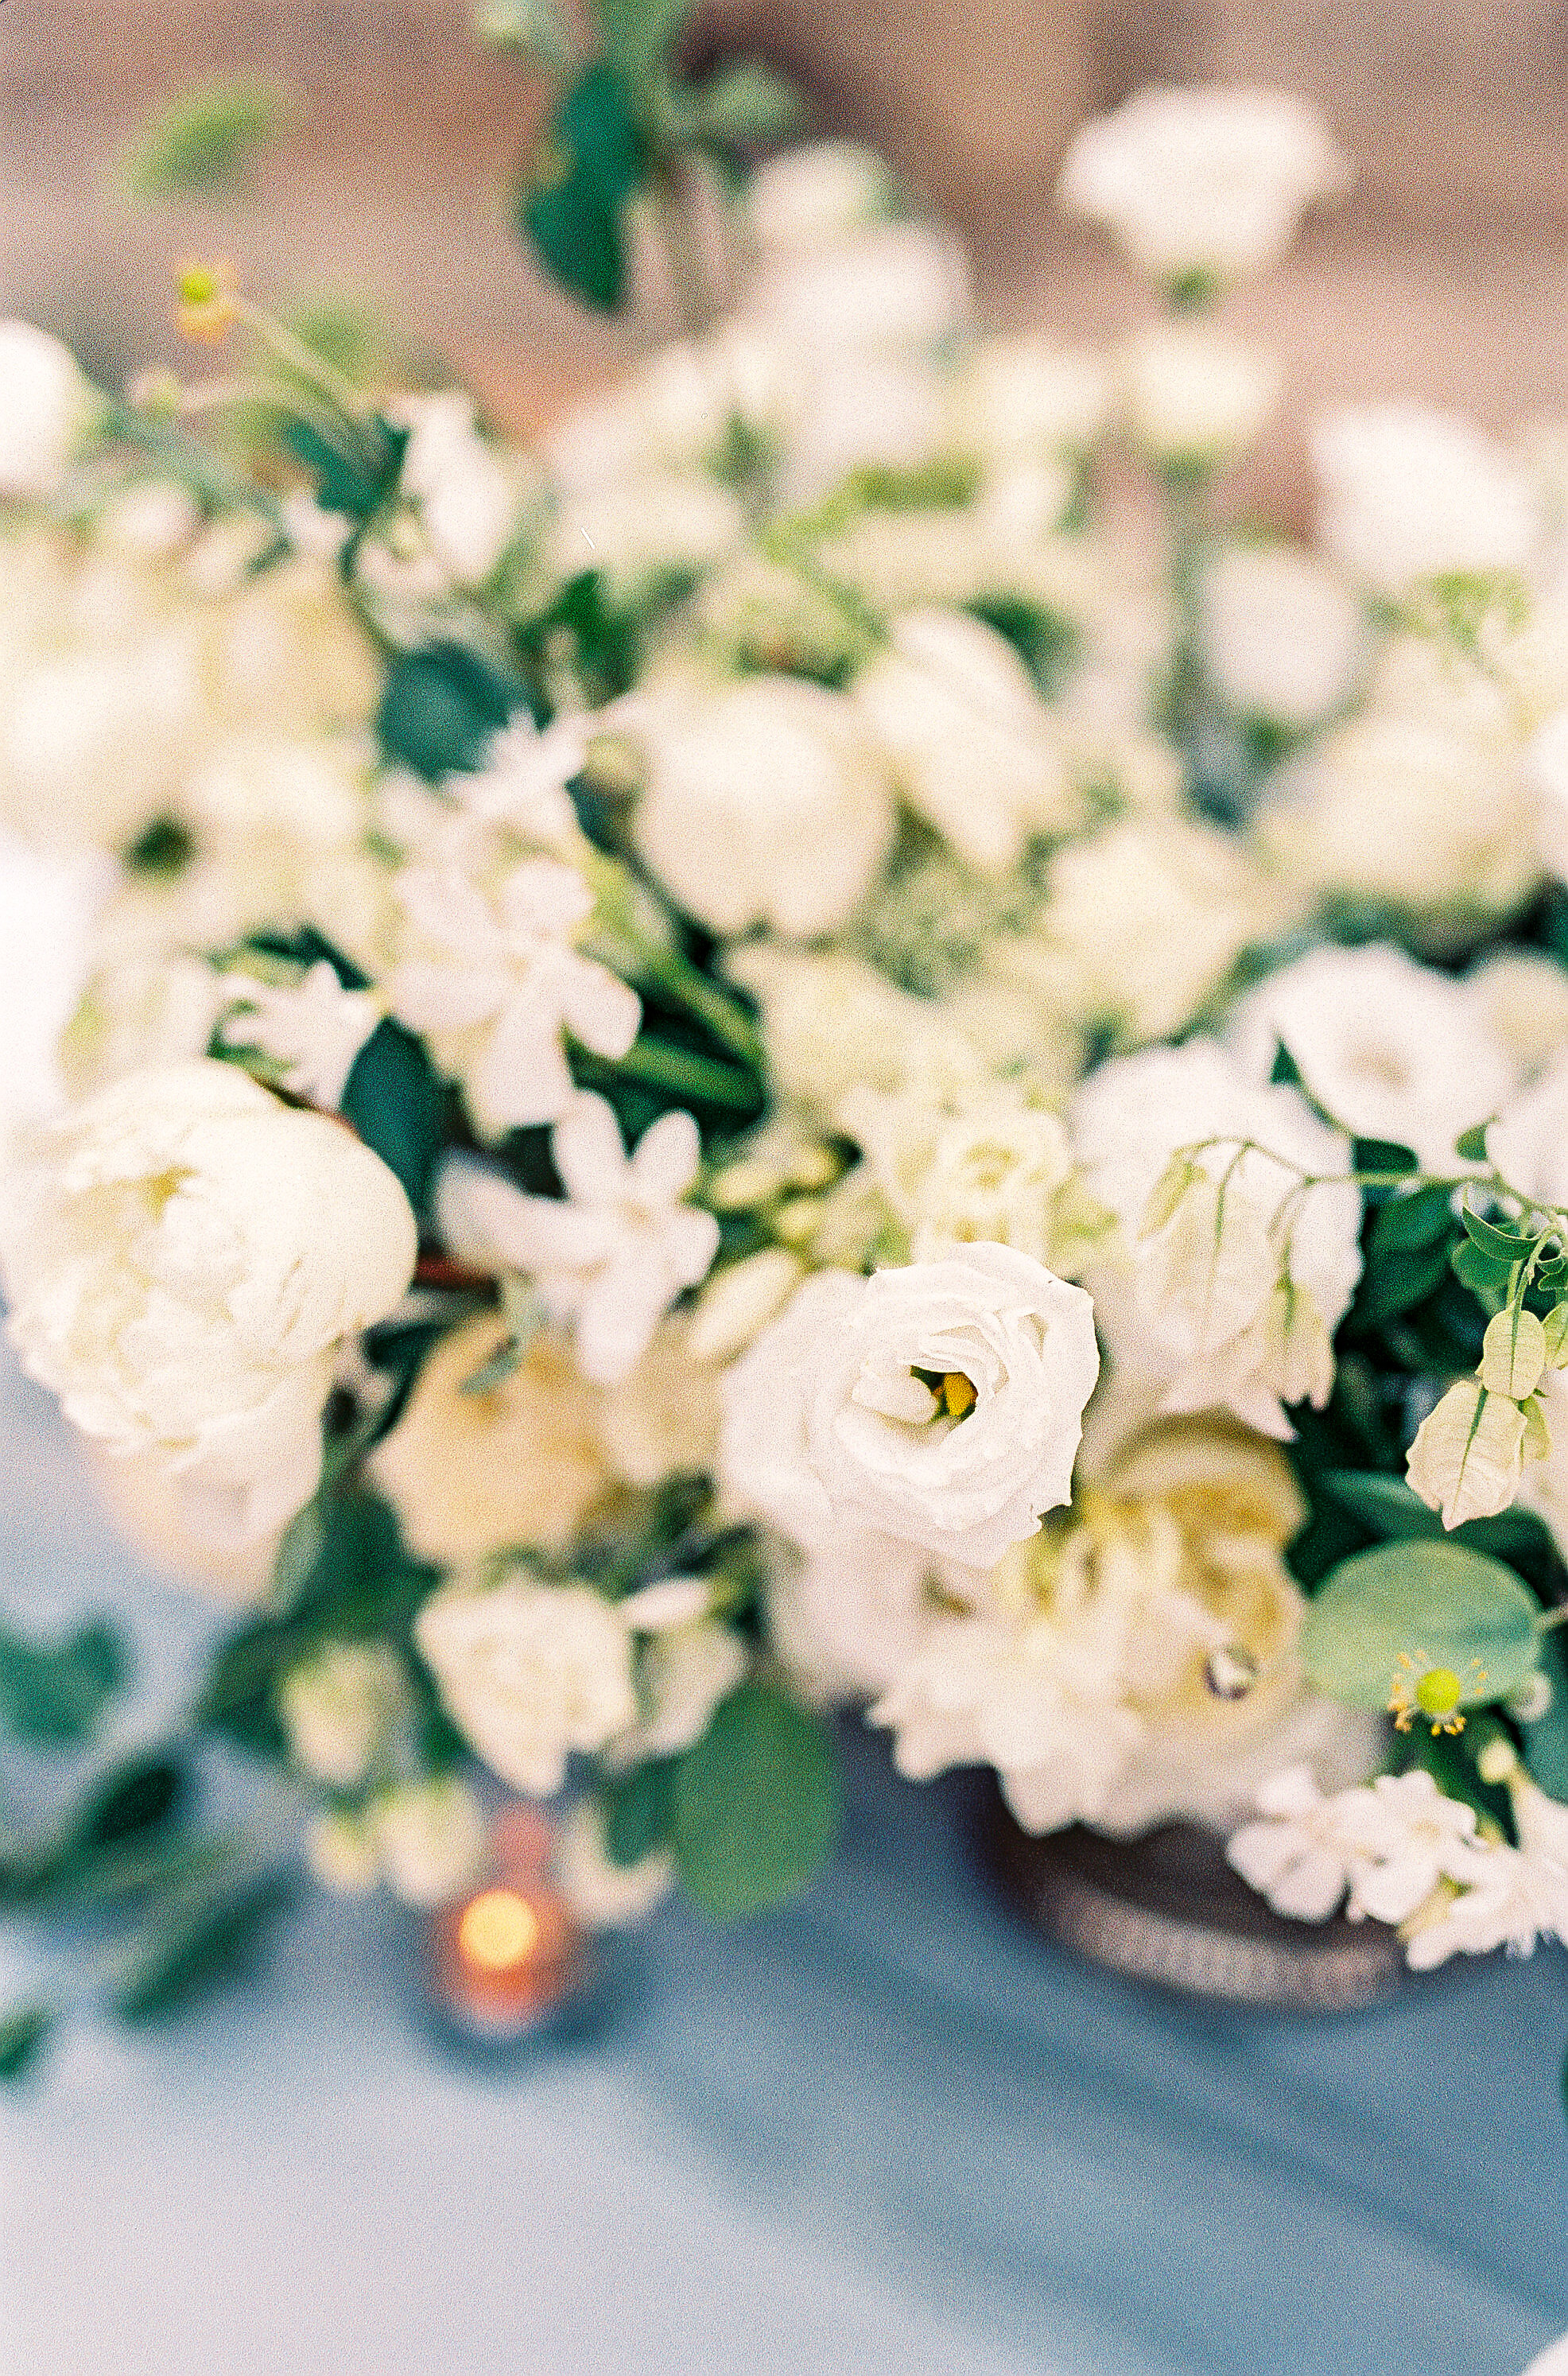 Ivory and White Centerpiece